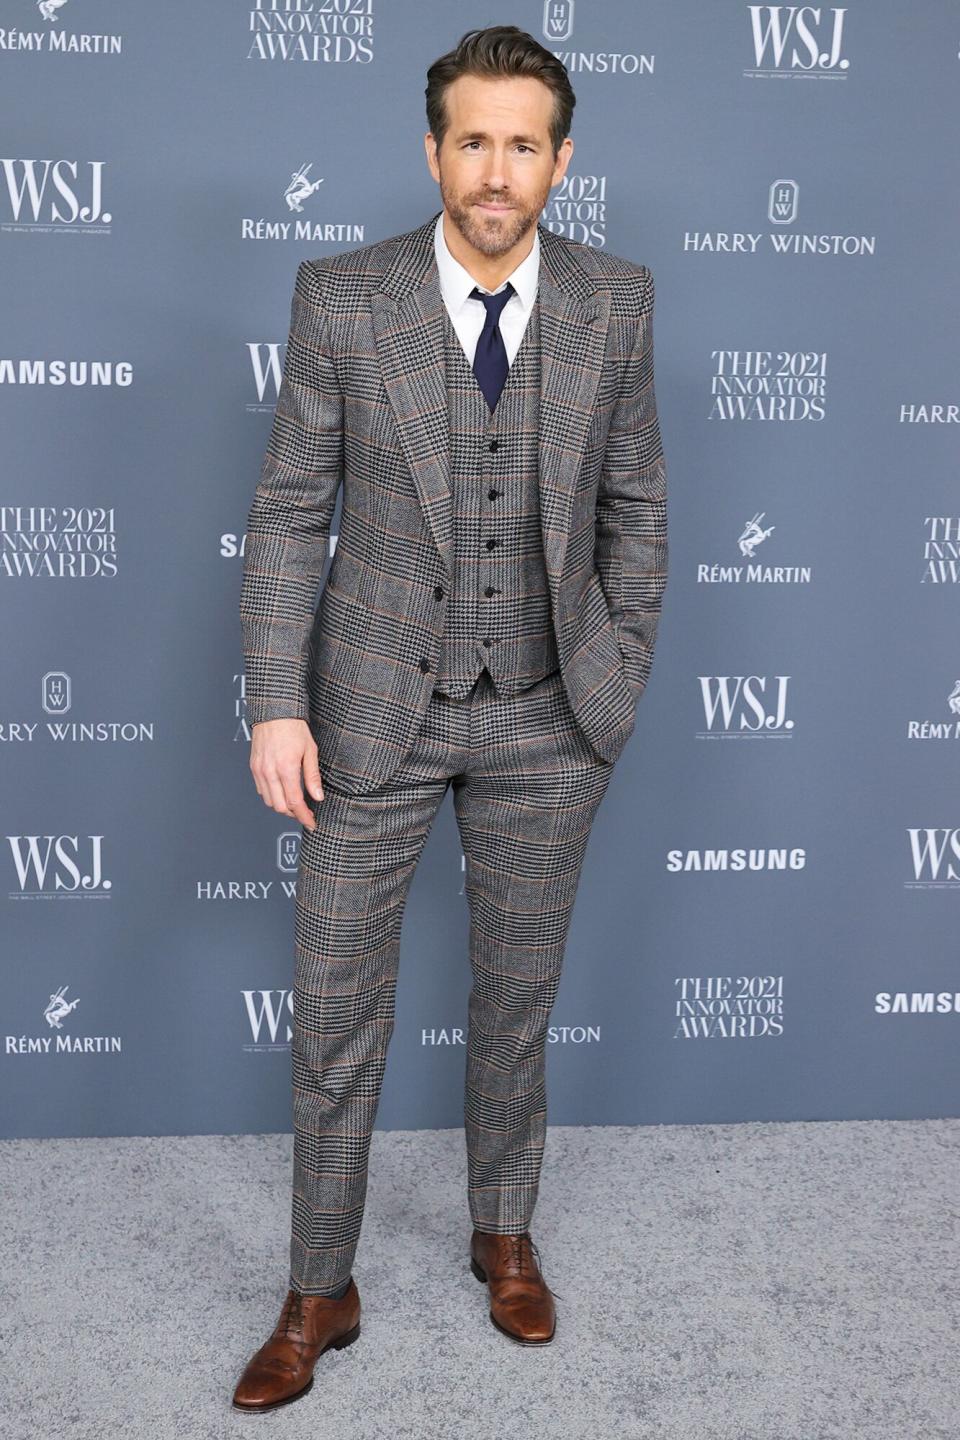 NEW YORK, NEW YORK - NOVEMBER 01: Actor Ryan Reynolds attends WSJ Magazine 2021 Innovator Awards at Museum of Modern Art on November 01, 2021 in New York City. (Photo by Theo Wargo/Getty Images)